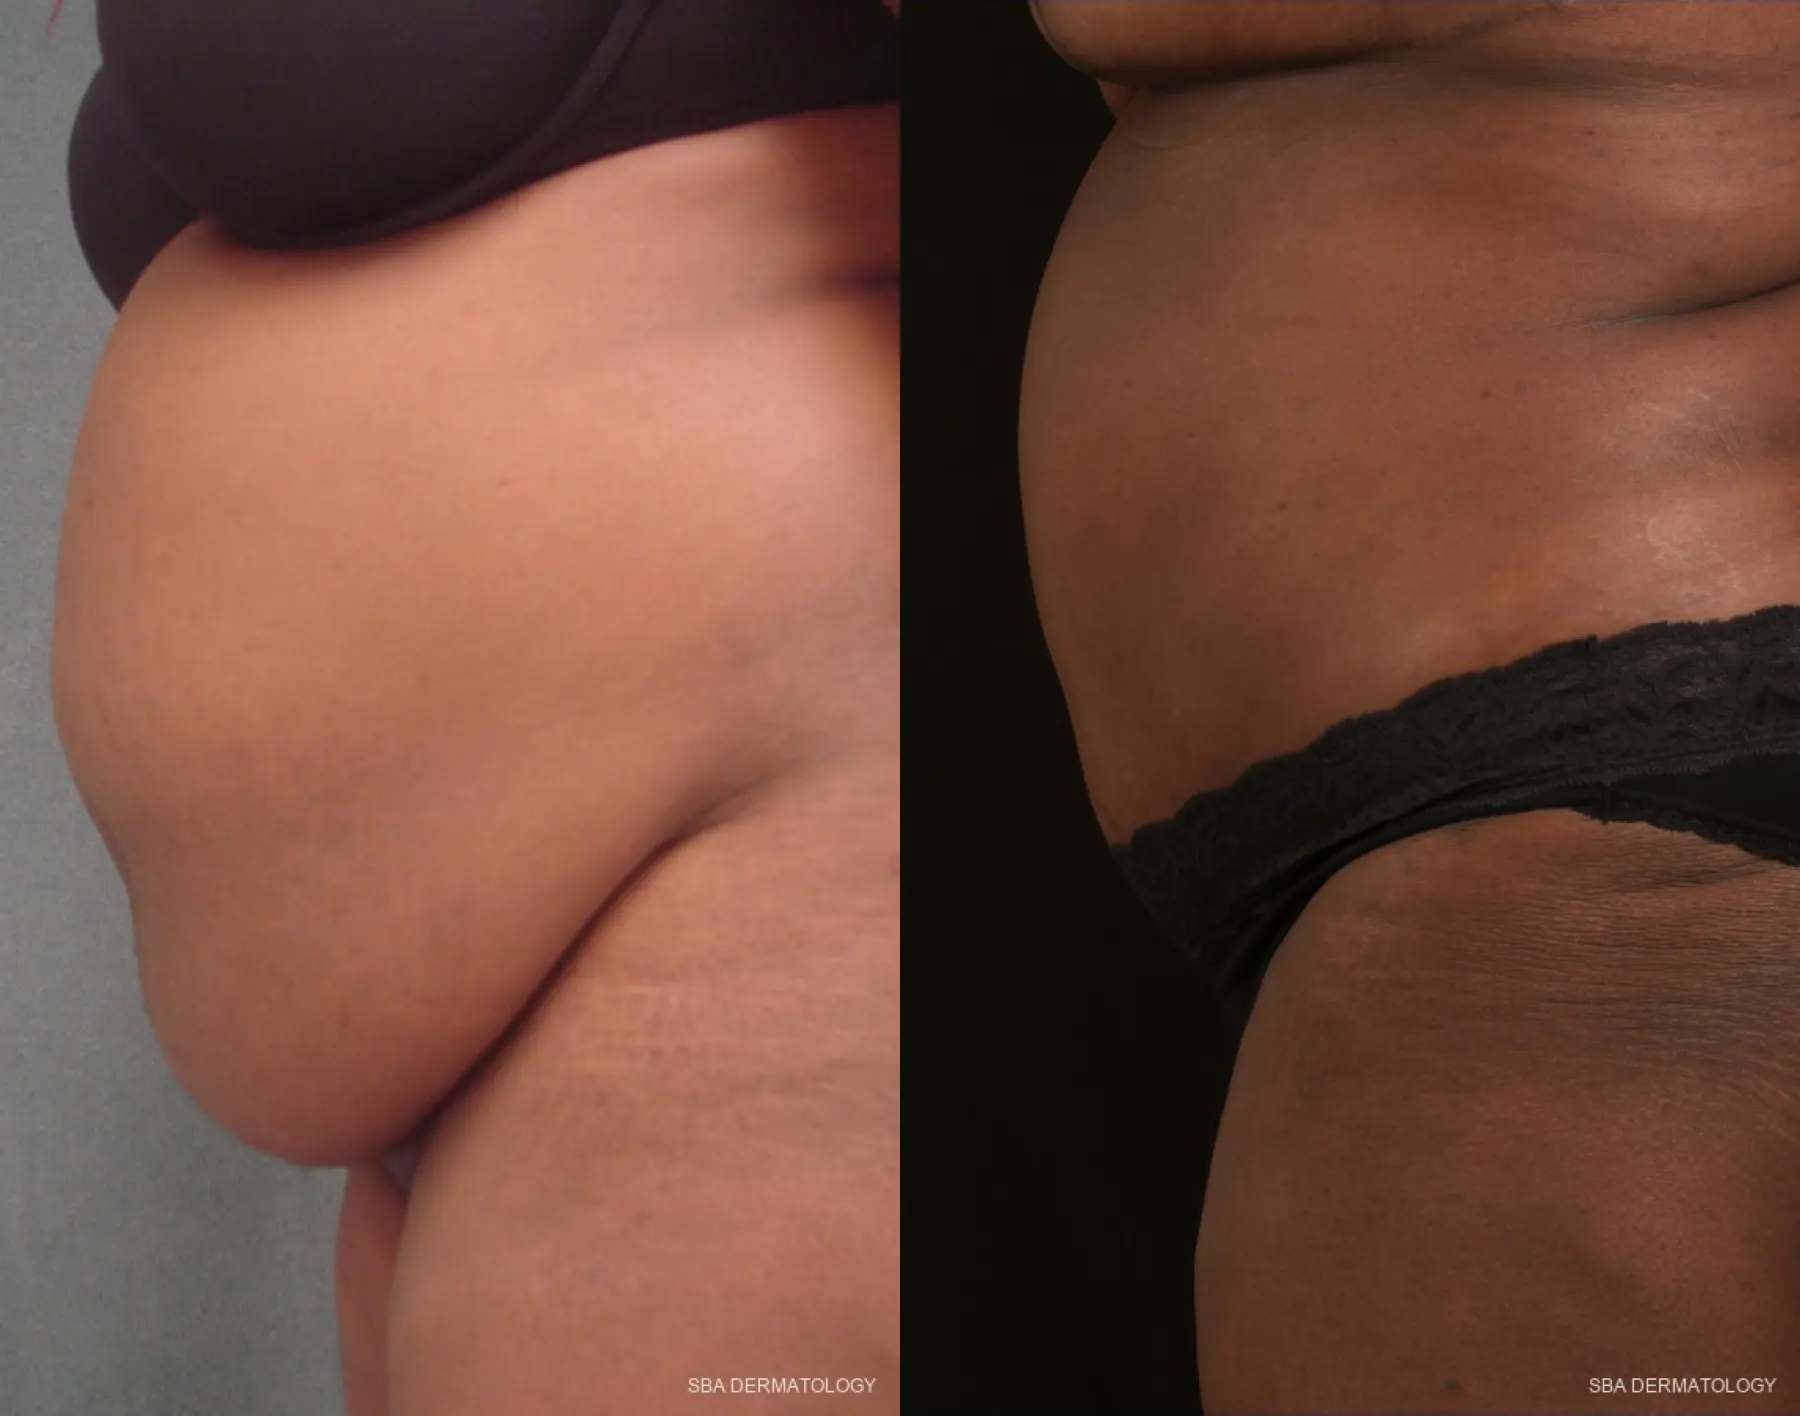 Tummy Tuck: Patient 3 - Before and After 2